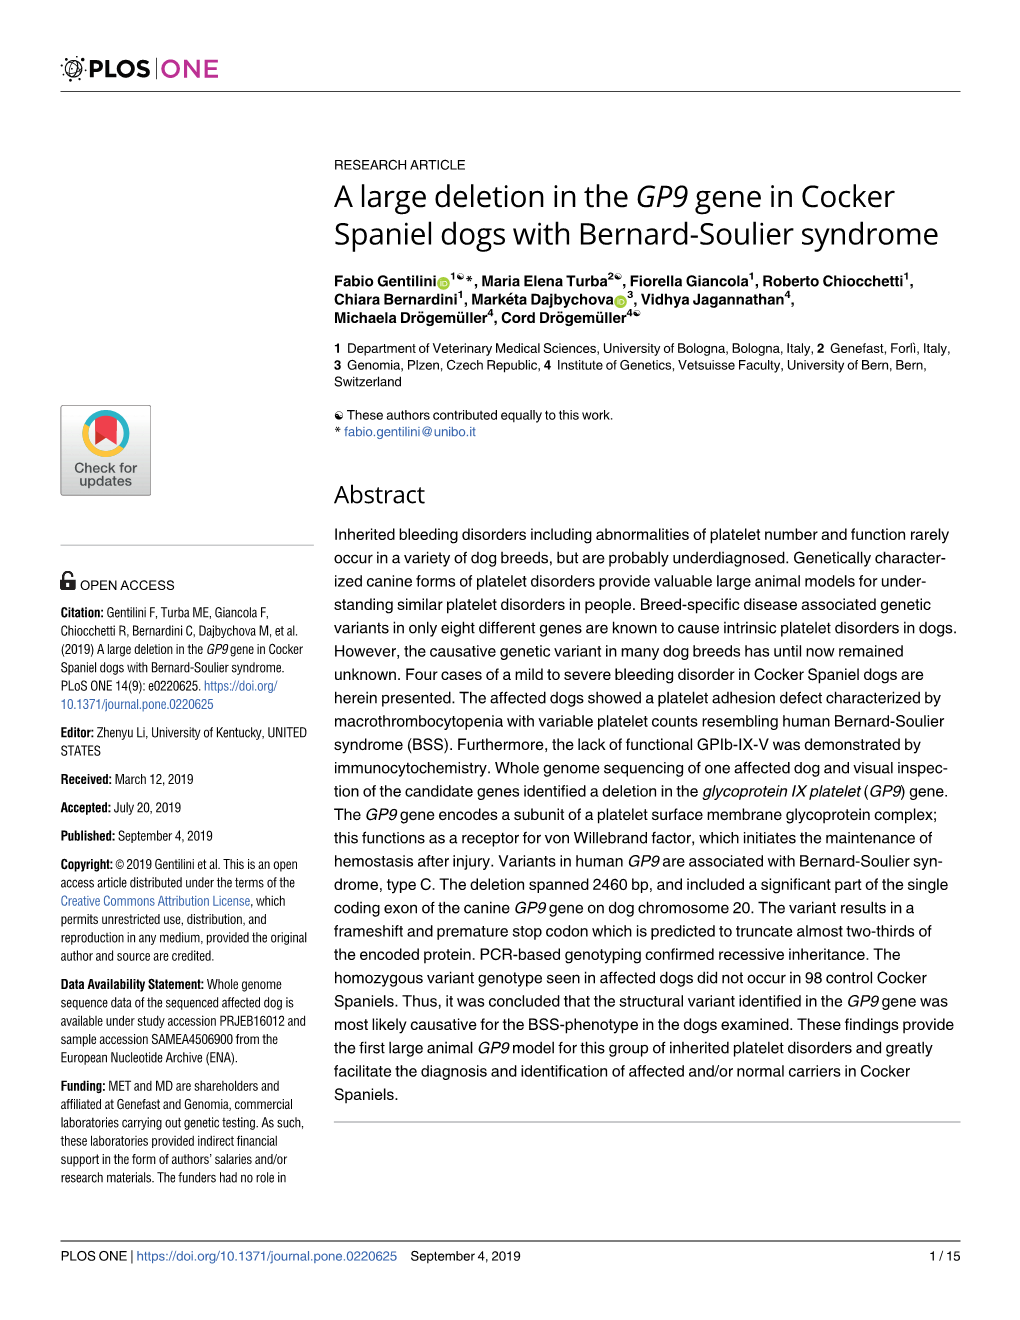 A Large Deletion in the GP9 Gene in Cocker Spaniel Dogs with Bernard-Soulier Syndrome